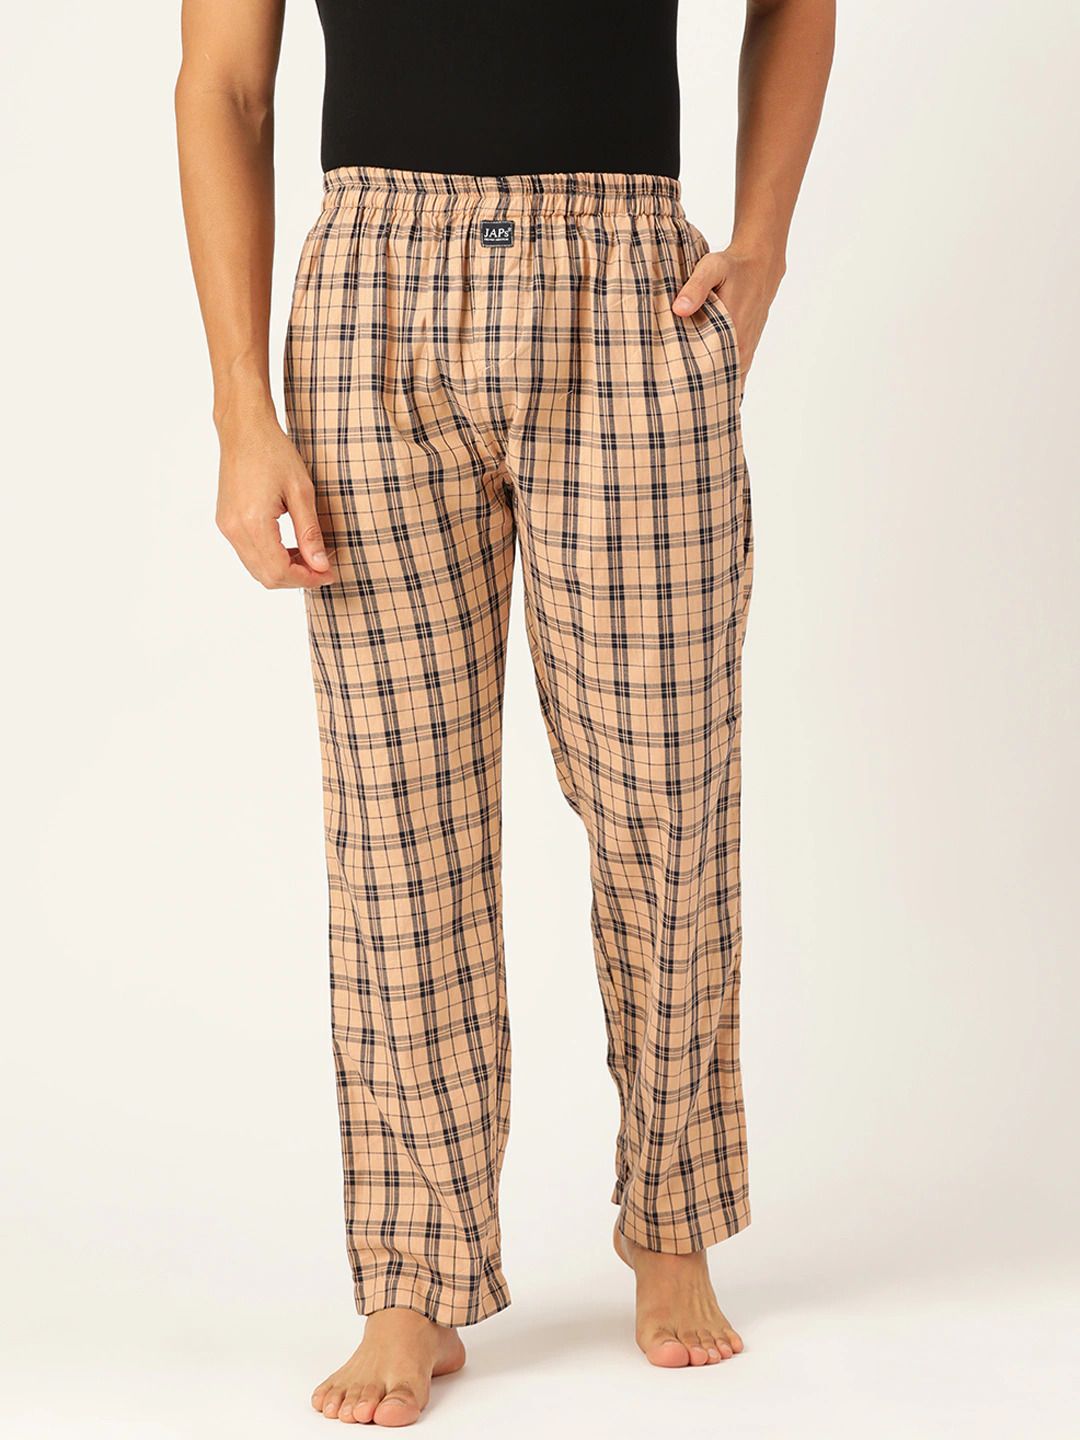 Buy Vintage Check Trousers Vintage Pantstrouserschecked Trouserswool  Pantsretro Trousersplaid Trousers Online in India - Etsy